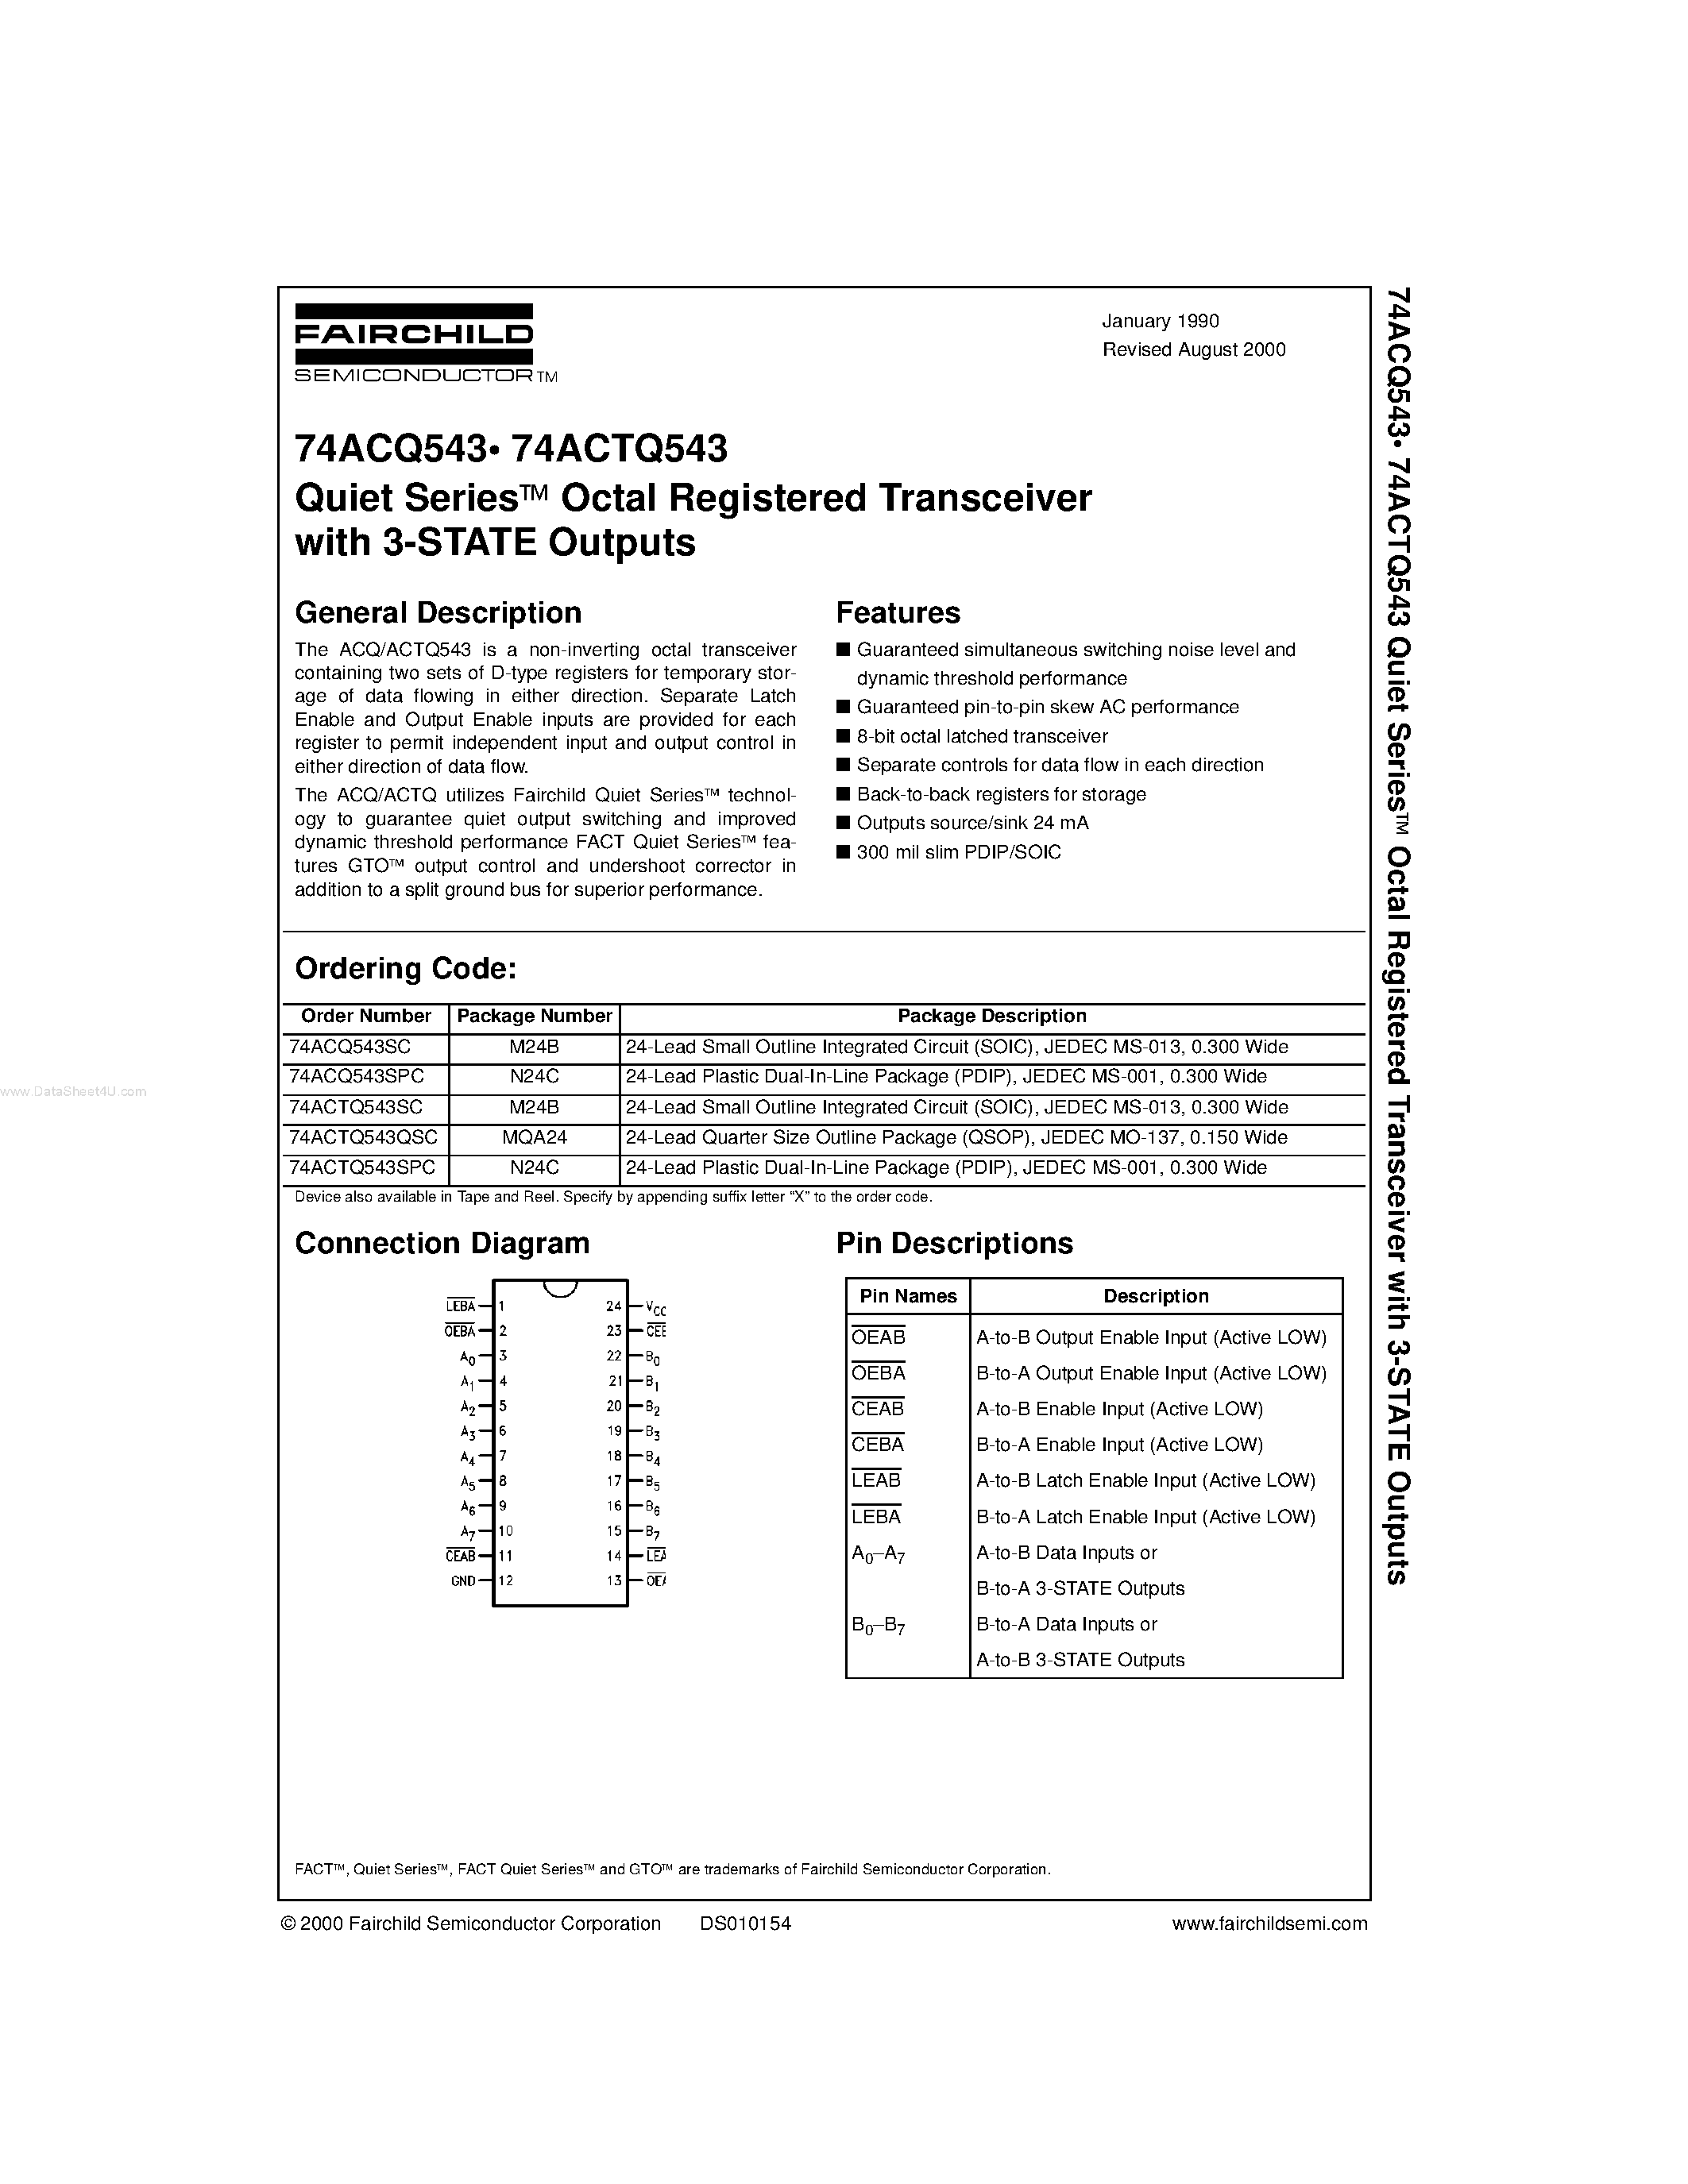 Datasheet 74ACTQ543 - Quiet Series Octal Registered Transceiver with 3-STATE Outputs page 1